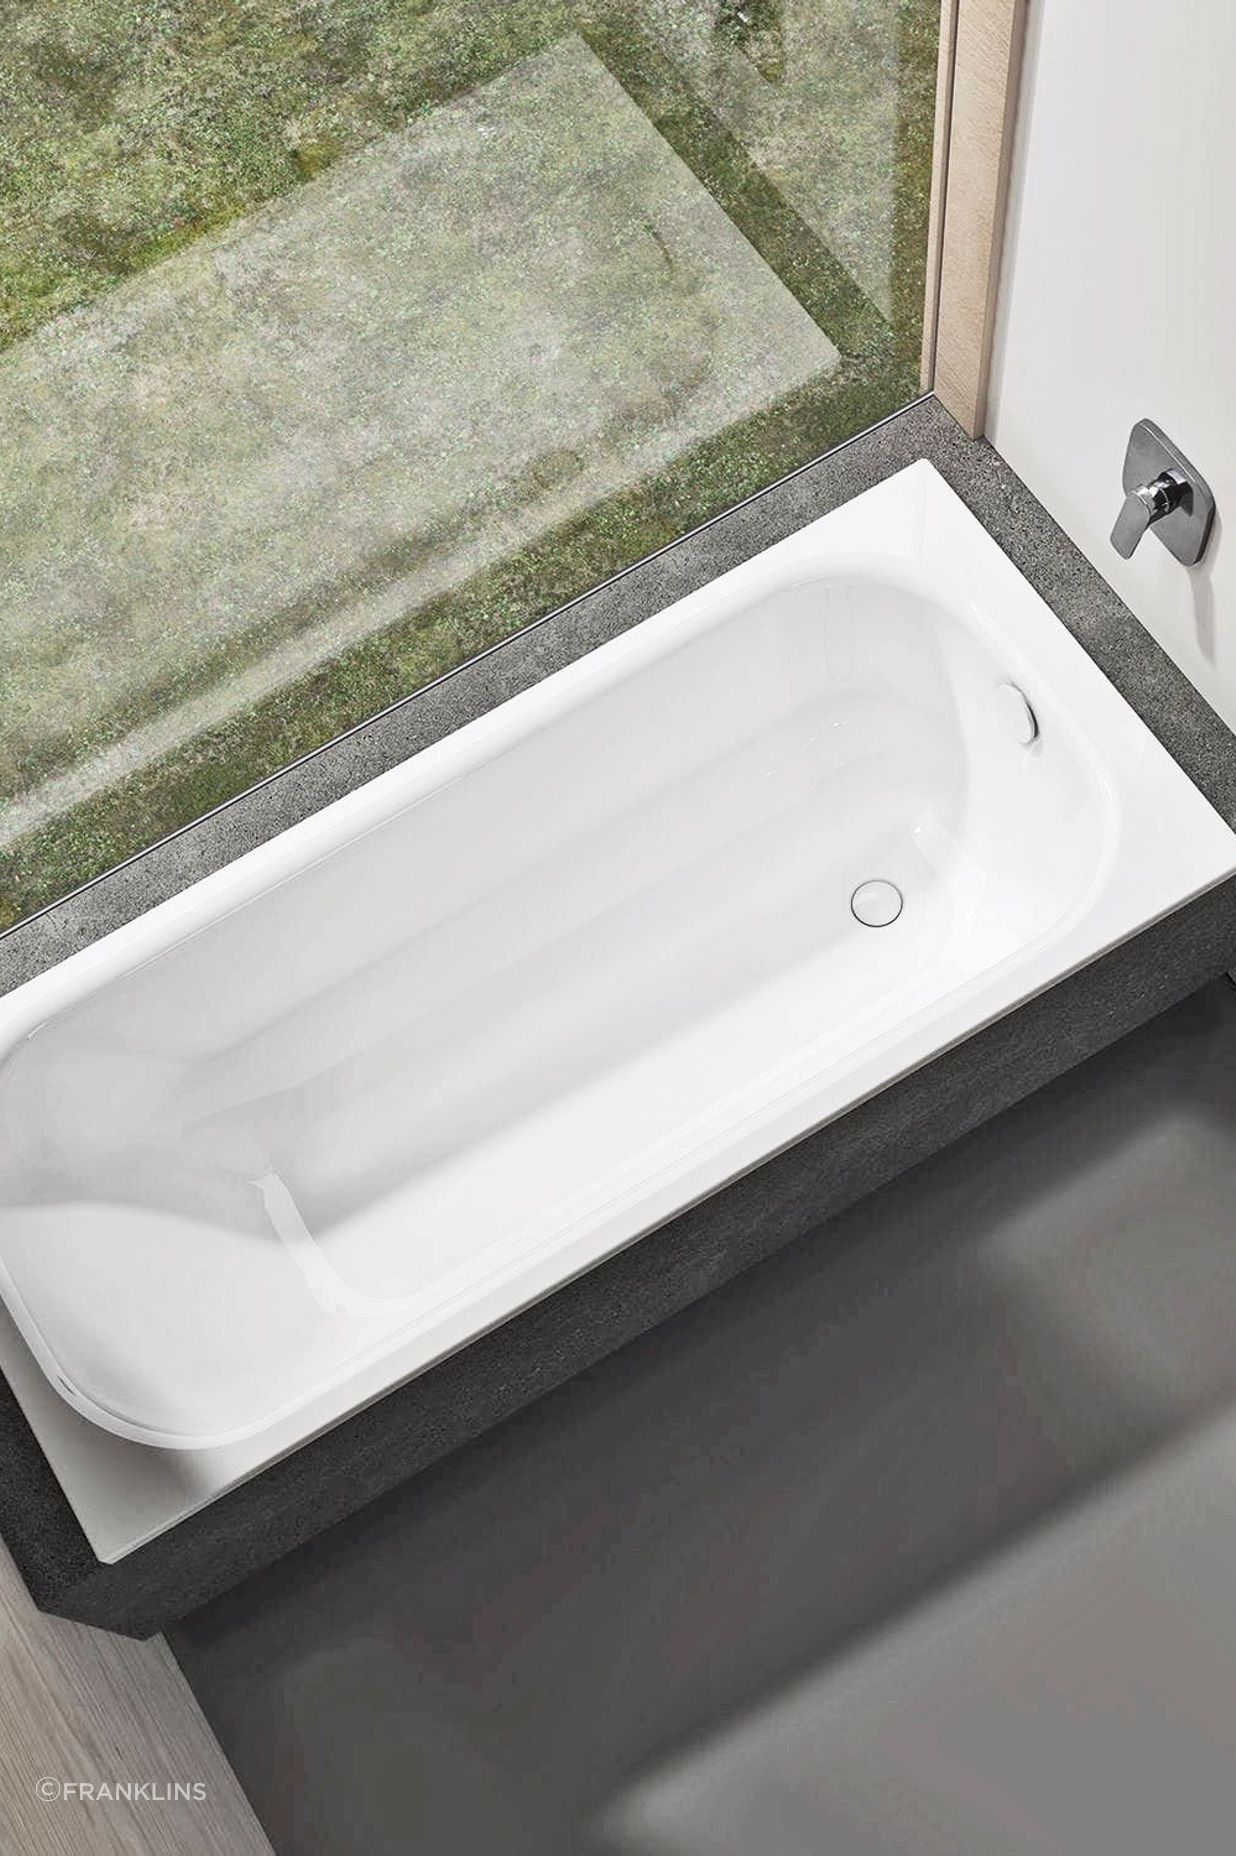 For those with an alcove space to utilise, choices like the BetteForm Drop-in Bath are an excellent solution